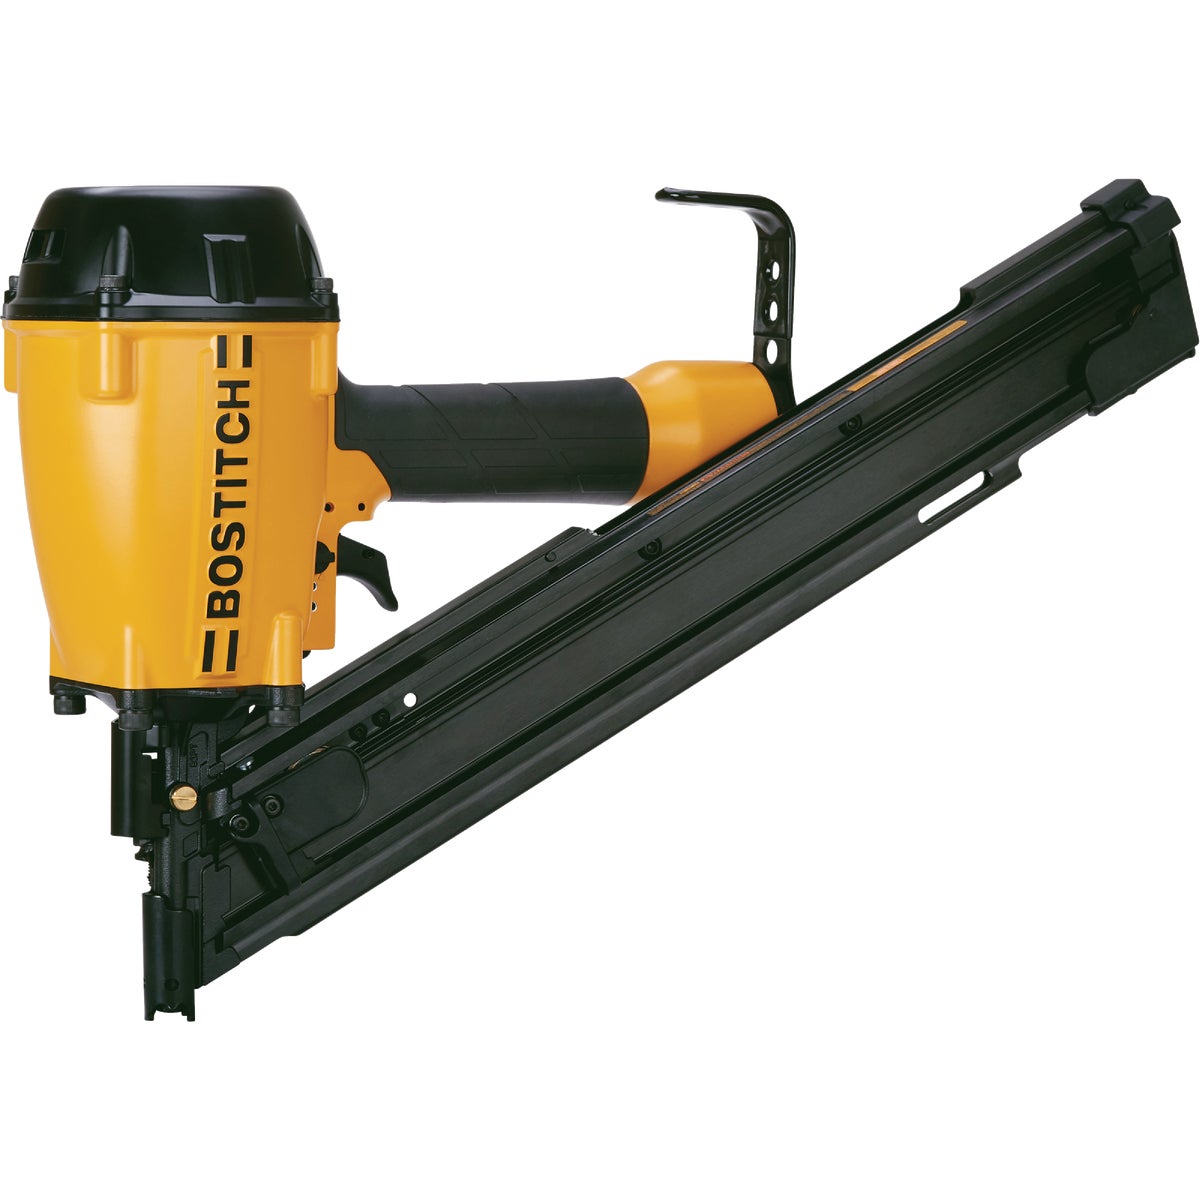 Item 302133, The 30-degree paper collated low profile framing nailer features a low 